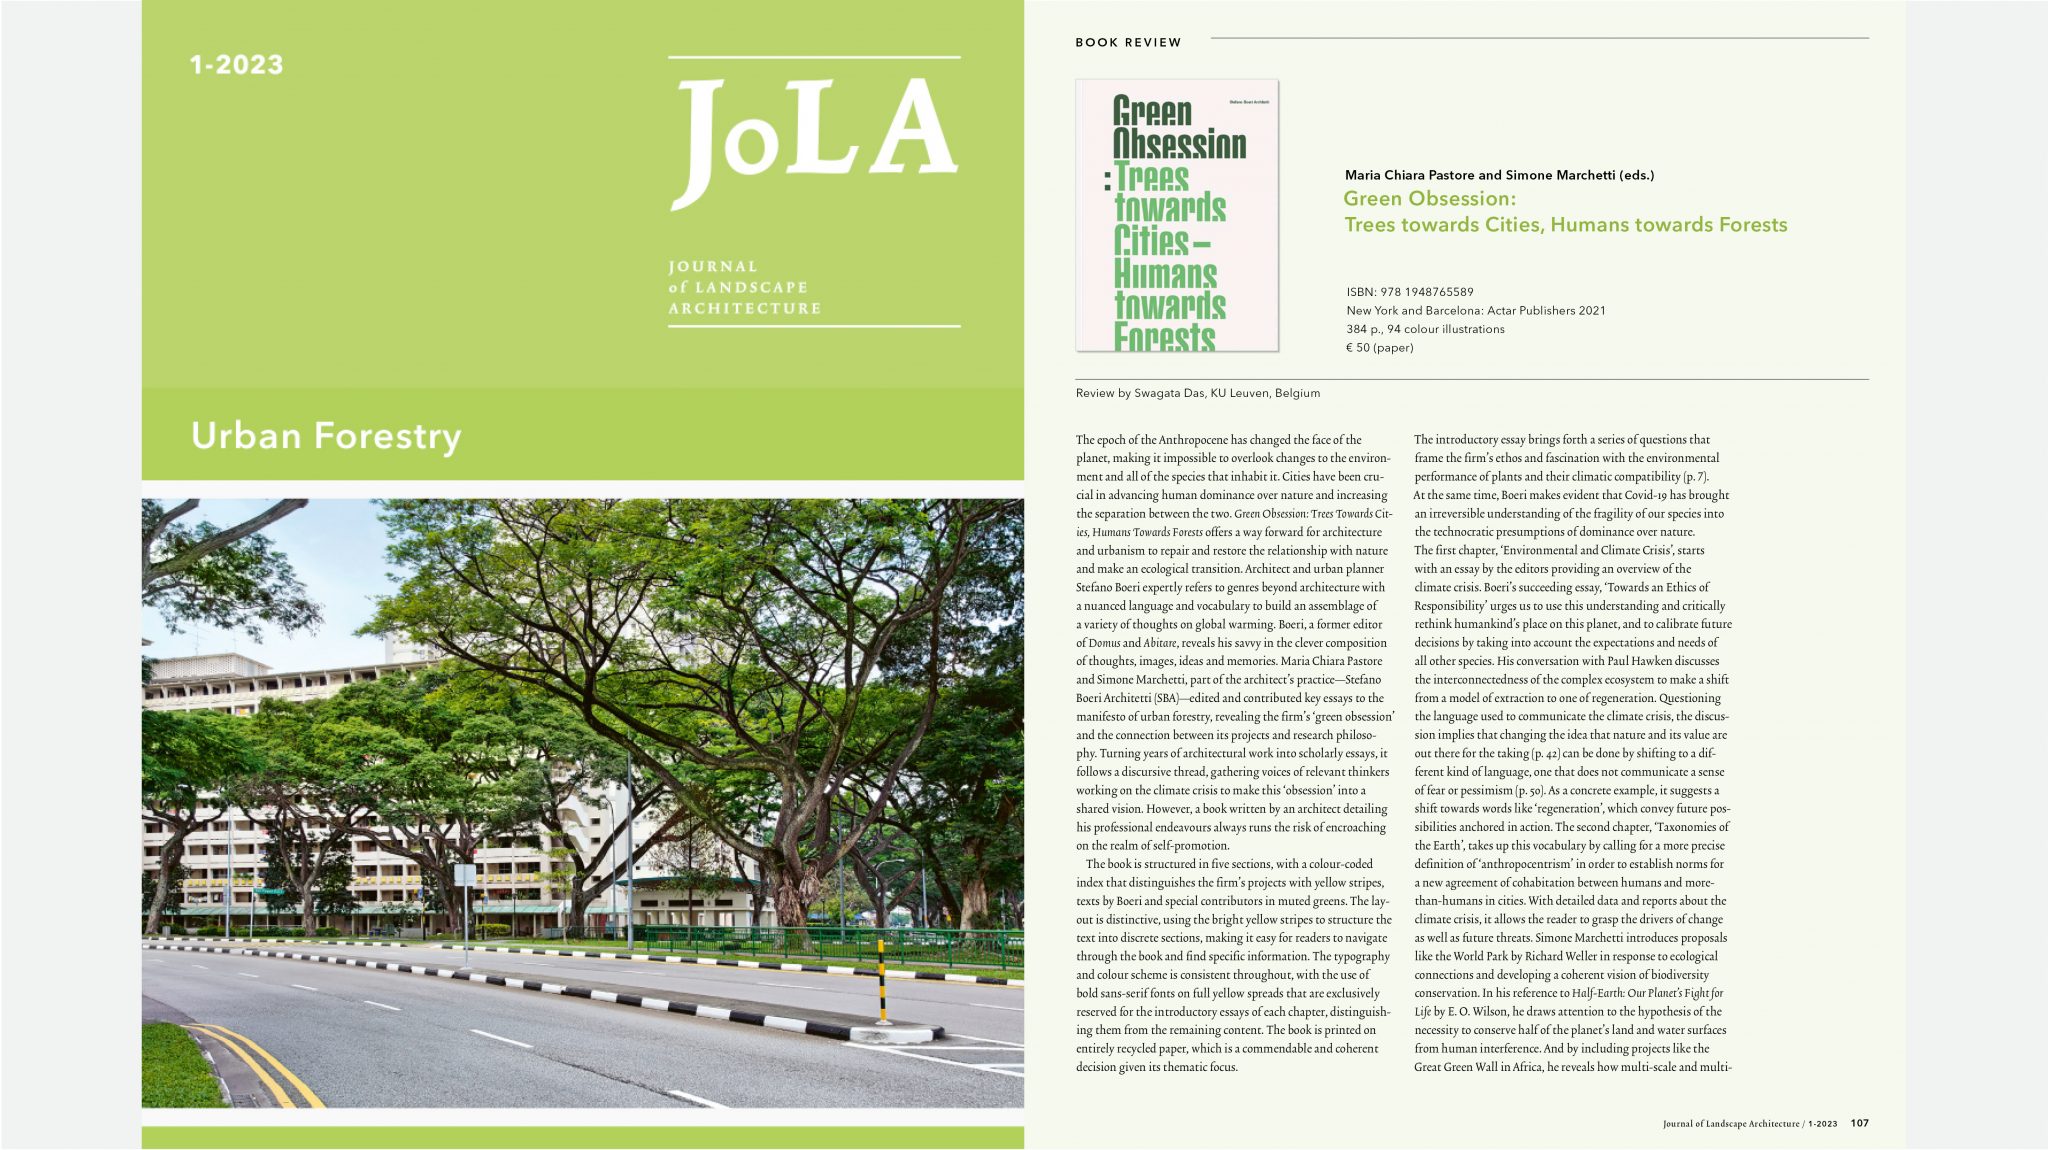 Green Obsession nel journal of landscape architecture